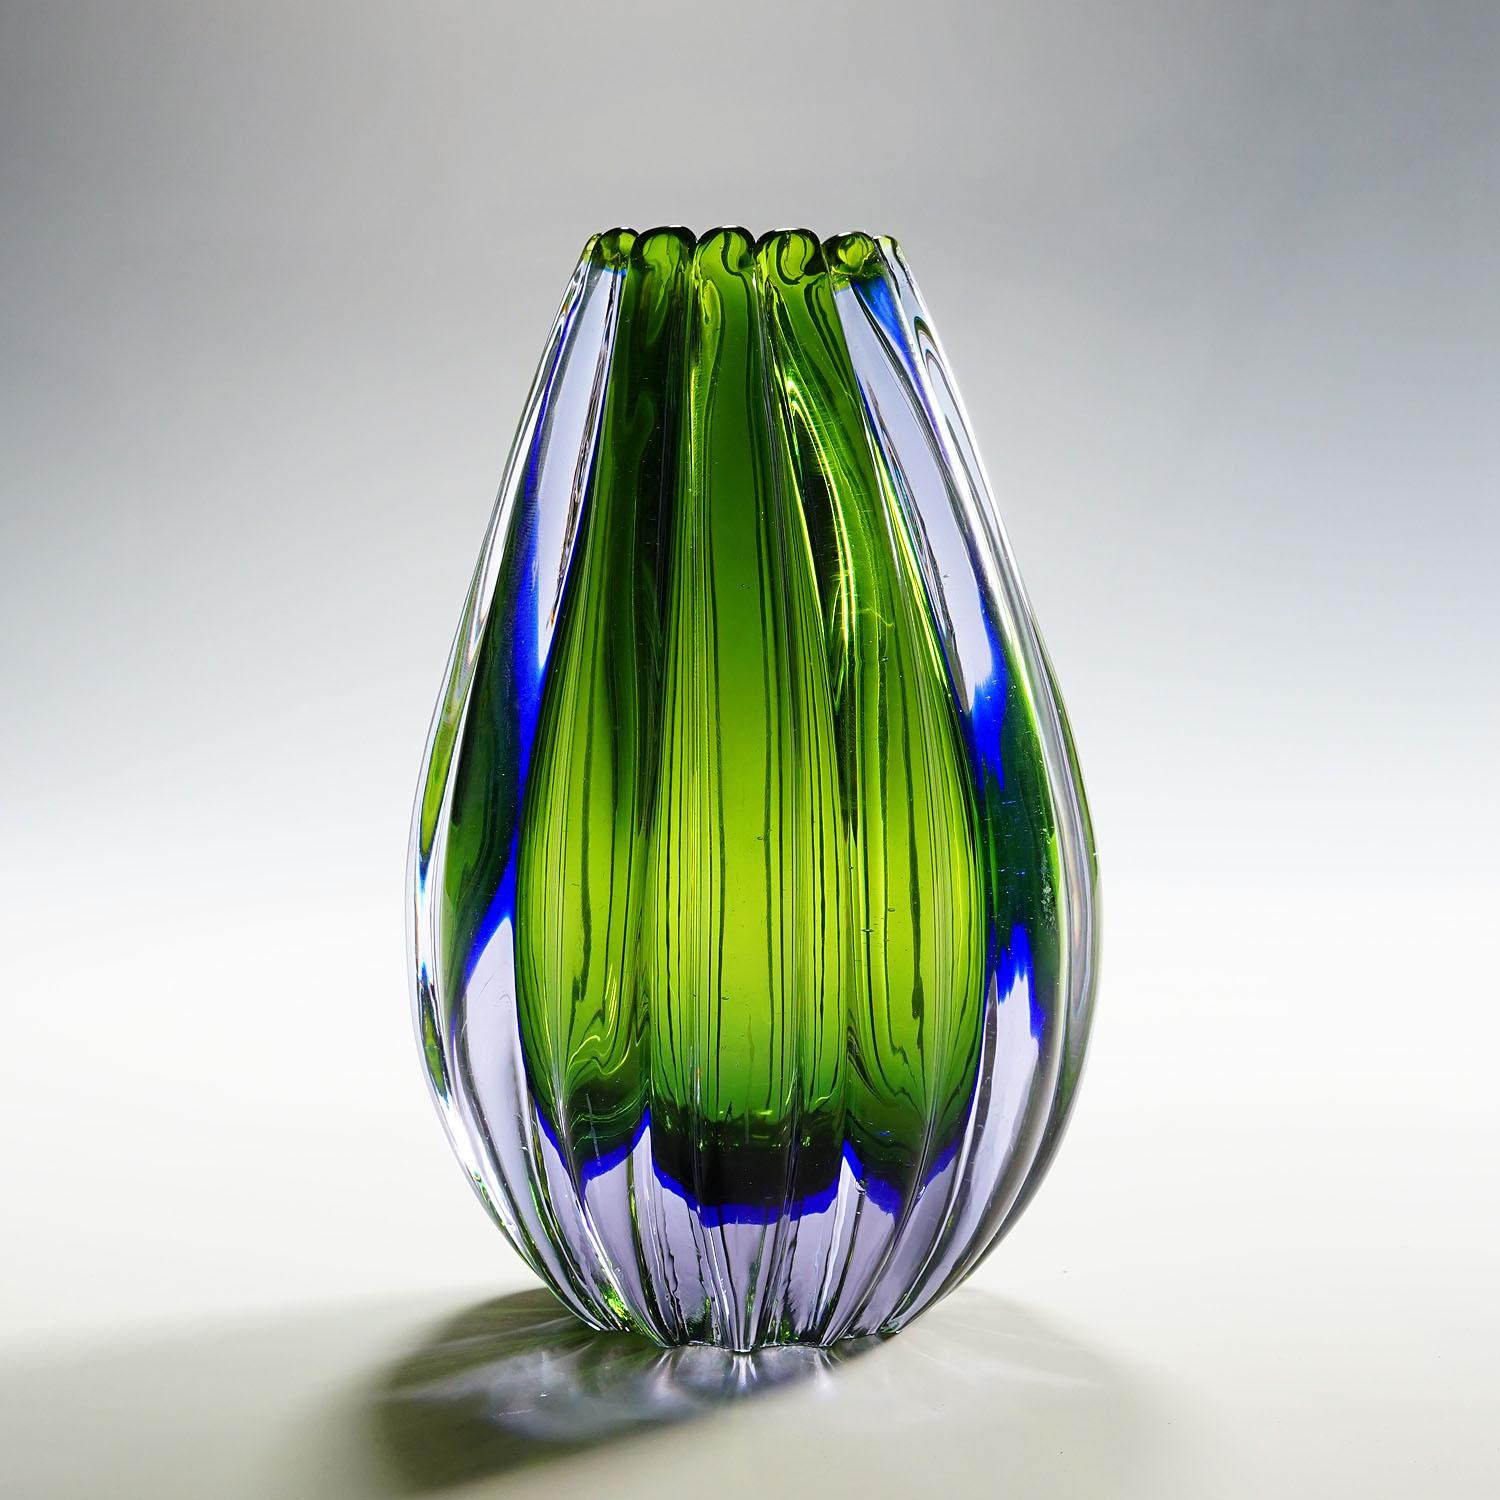 Seguso Vetri d'Arte Murano Sommerso glass vase 1950s

A vintage Murano sommerso art glass vase. Designed by Flavio Poli and manufactured by Seguso Vetri d'Arte circa 1958. Seguso Model number 12024. Manufactured in thick violet glass with a blue